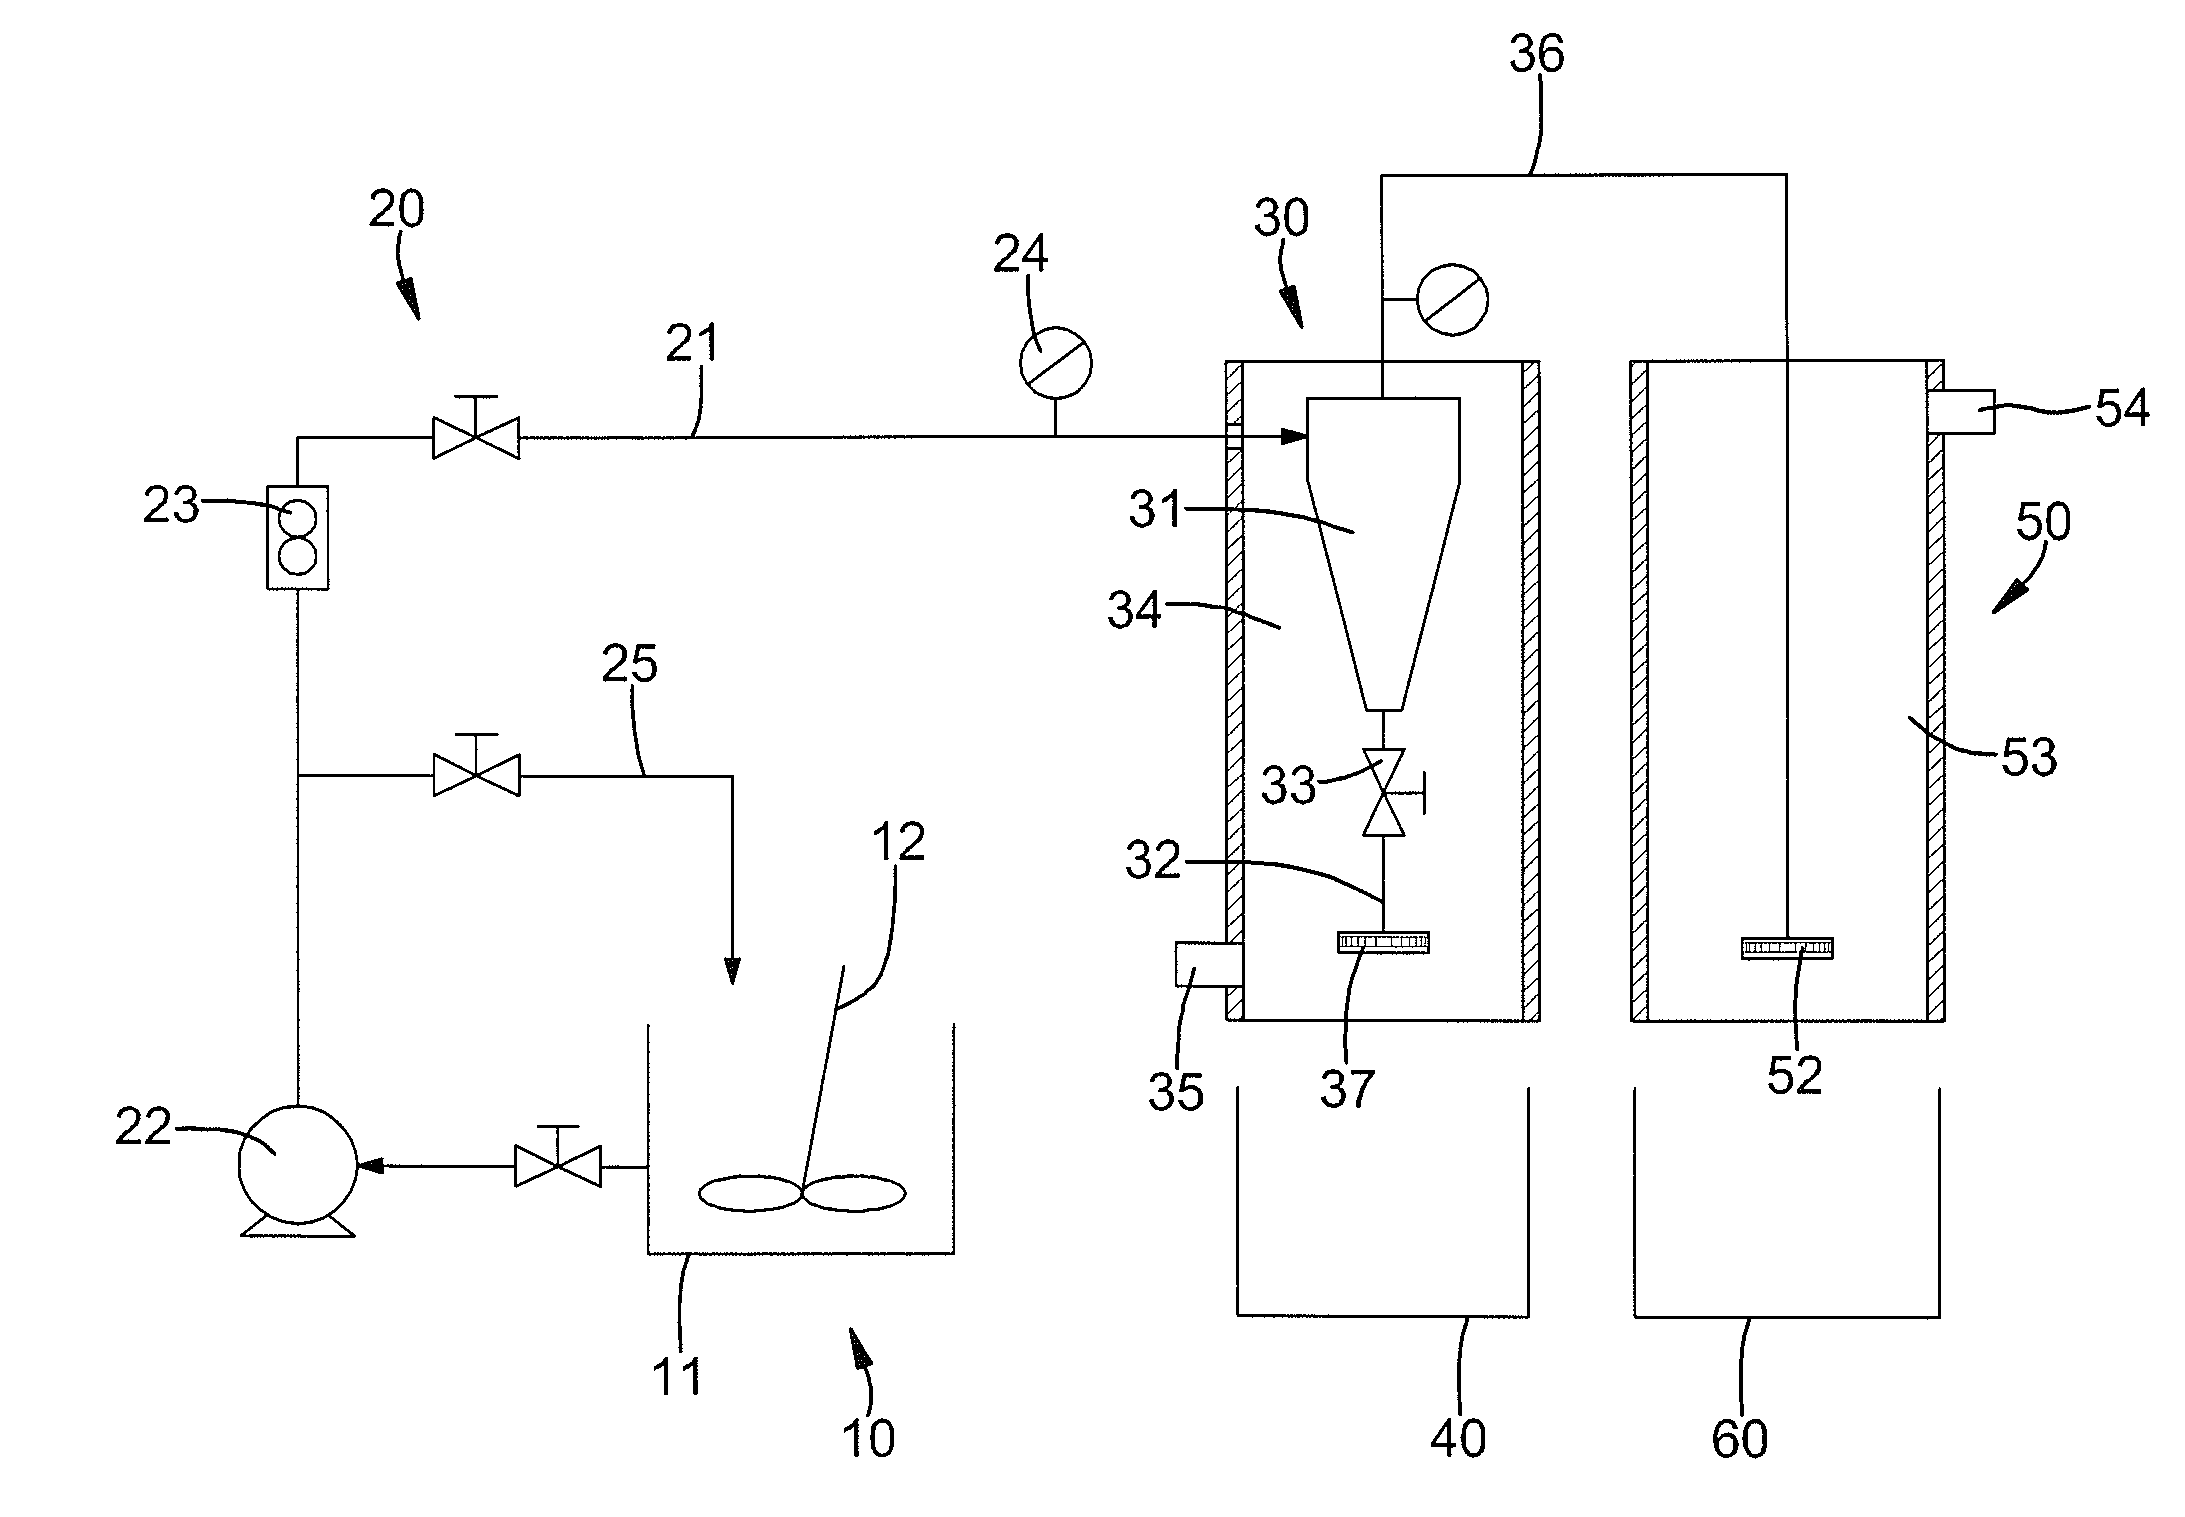 Separation apparatus for separating mud from water